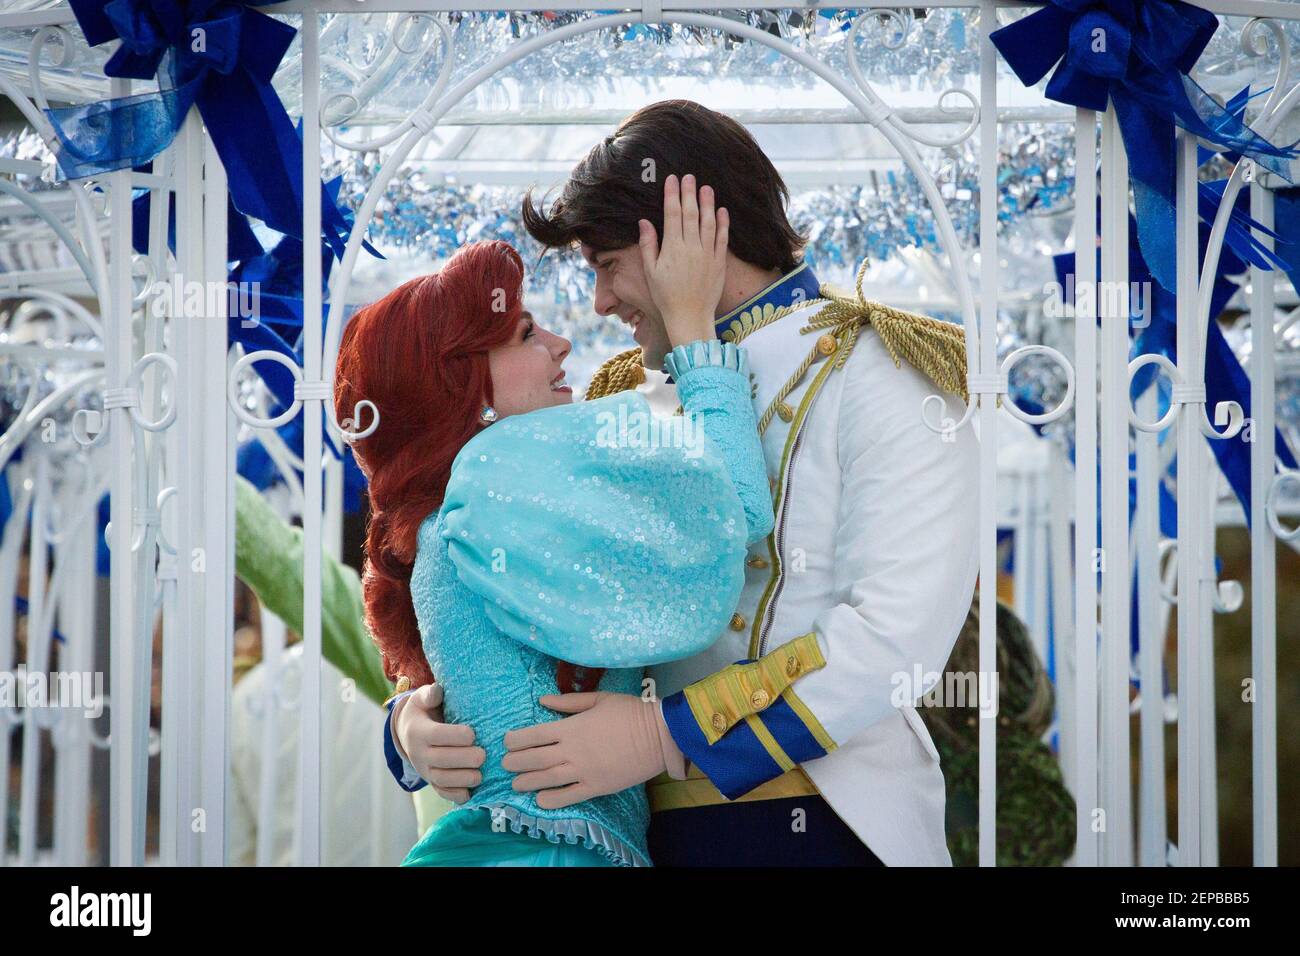 Disney characters Ariel the Little Mermaid and Prince Eric are featured on a float in the 6ABC Thanksgiving Day Parade in Philadelphia, November 28, 2019. On the parade's 100th anniversary, strong winds grounded large balloons from the parade route, but turnout was still considerable on the city's Benjamin Franklin Parkway. (Photo by Michael Candelori/Sipa USA) Stock Photo